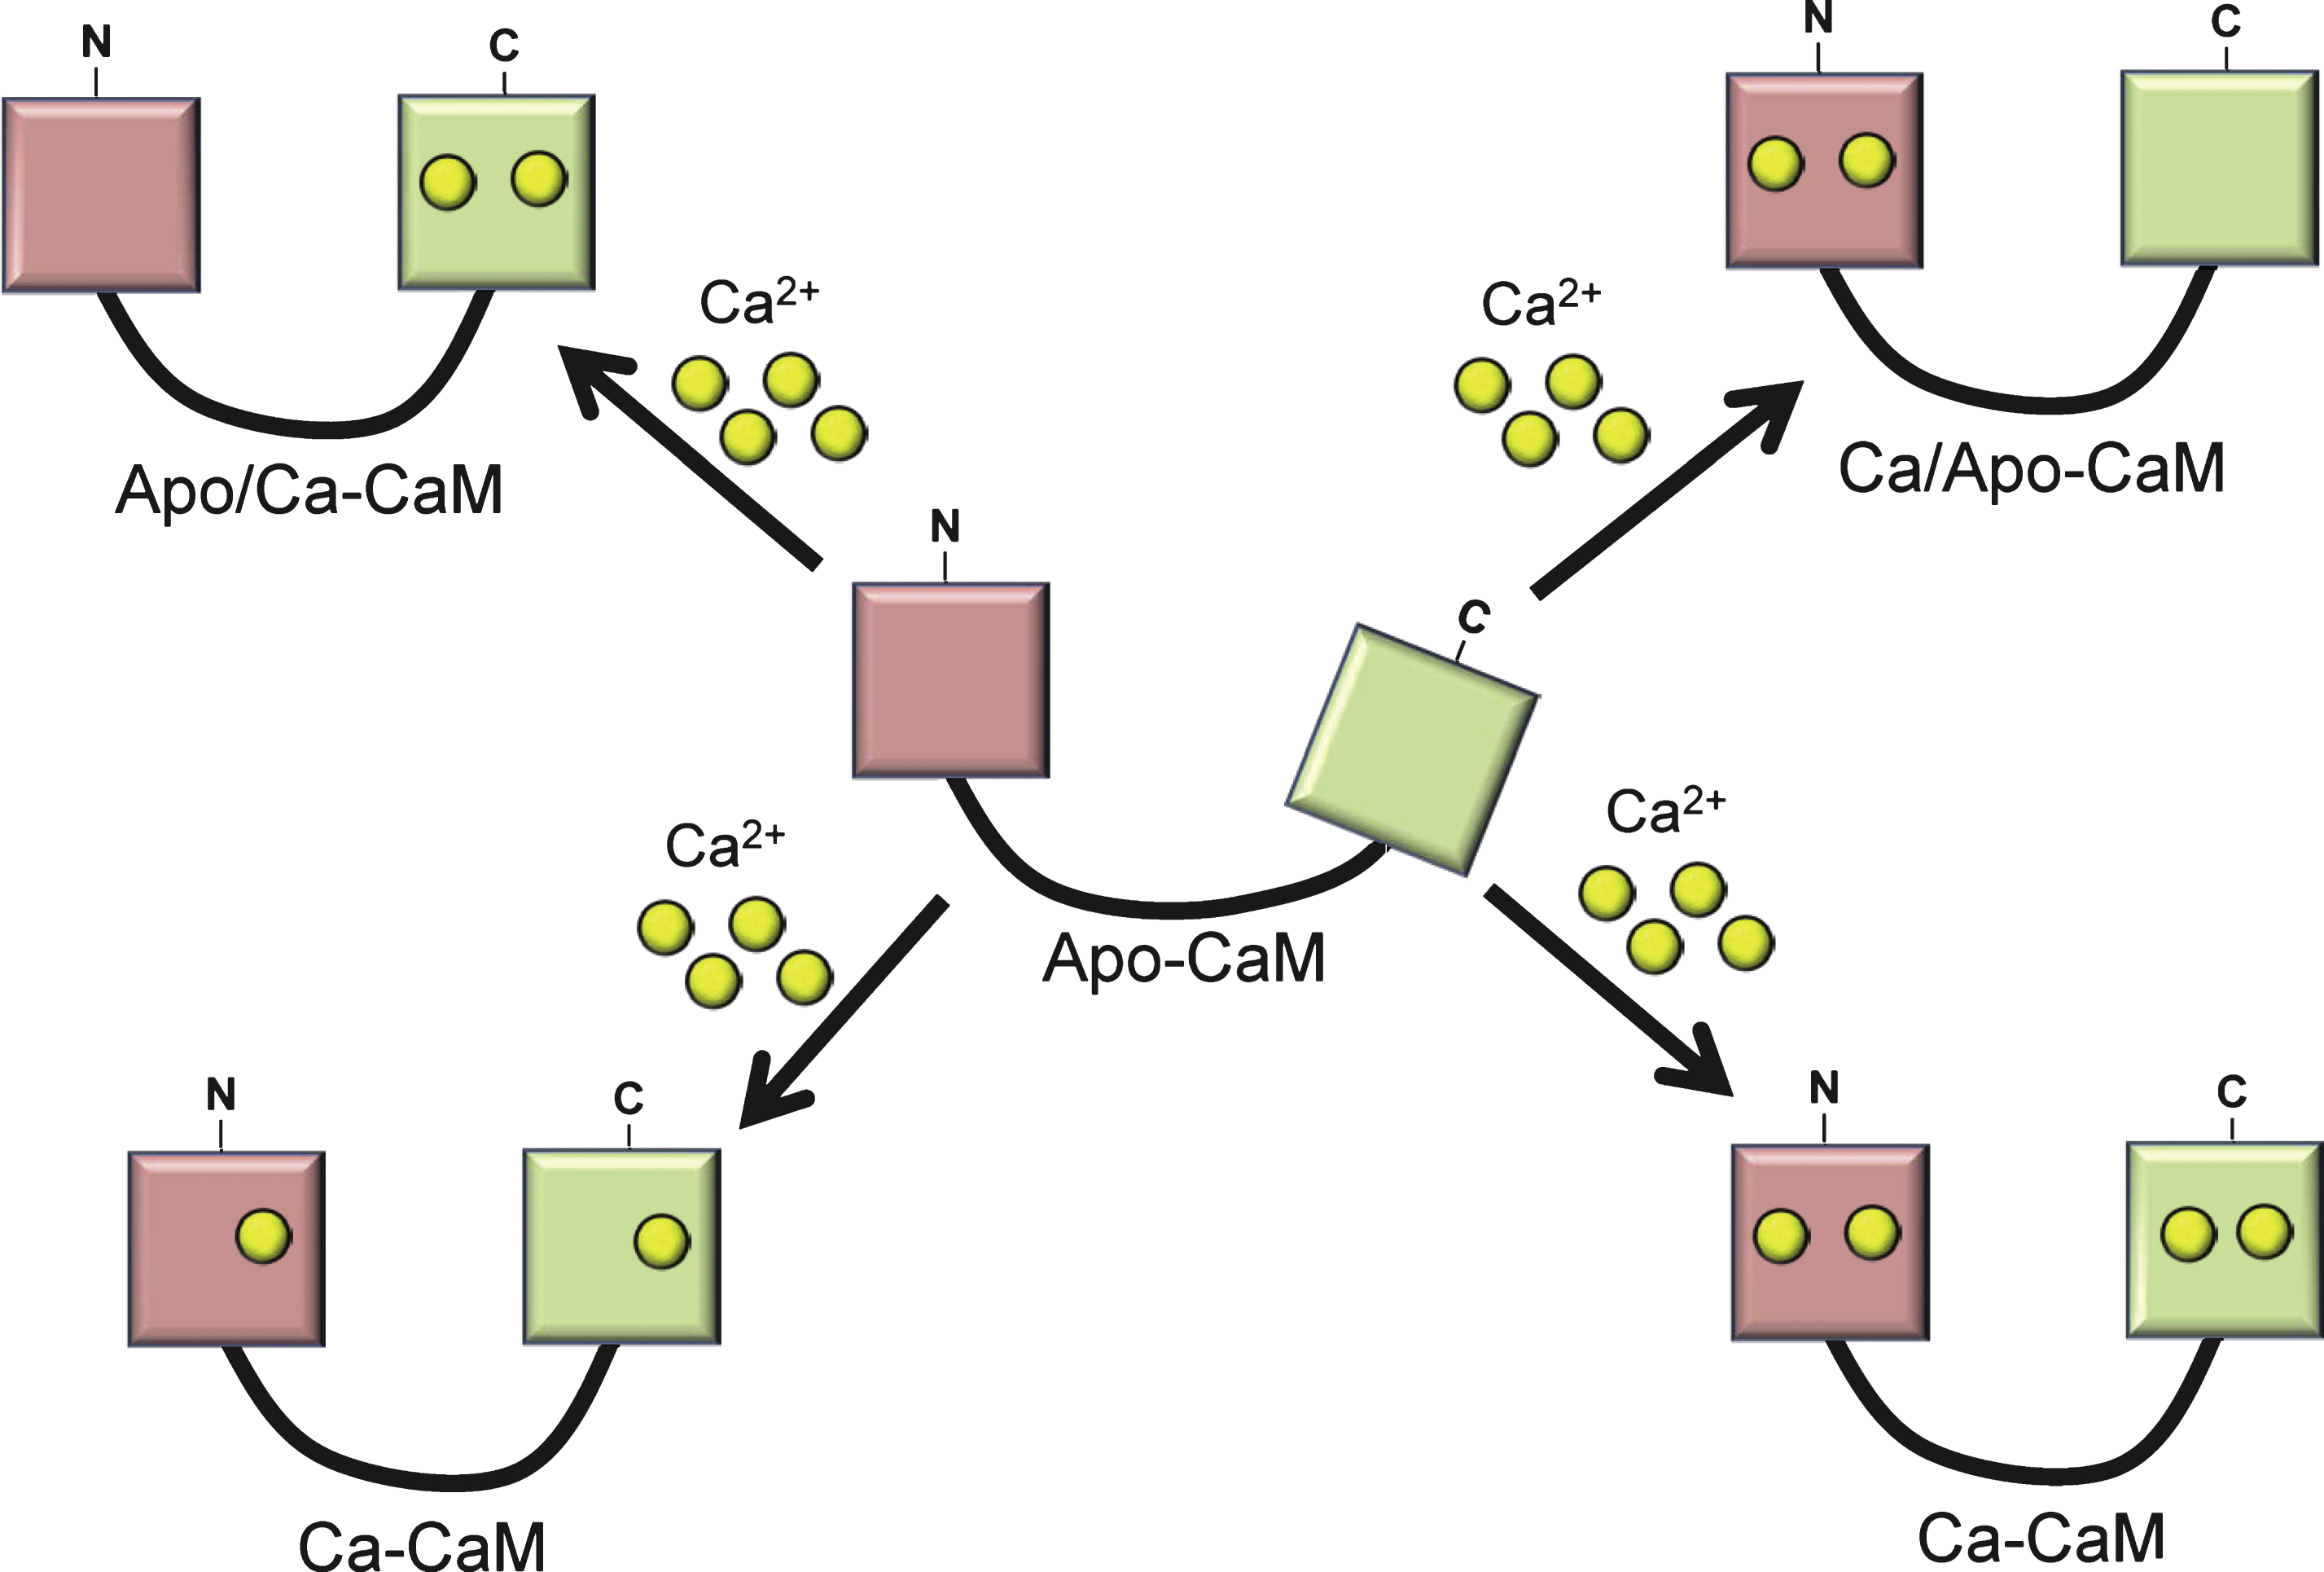 Apo-Calmodulin (Apo-CaM) can bind up to two calcium ions in each of its N-term (pink) or C-term lobes (green). These binding options affect the conformation of CaM and its ability to bind to specific target CaM-binding proteins.